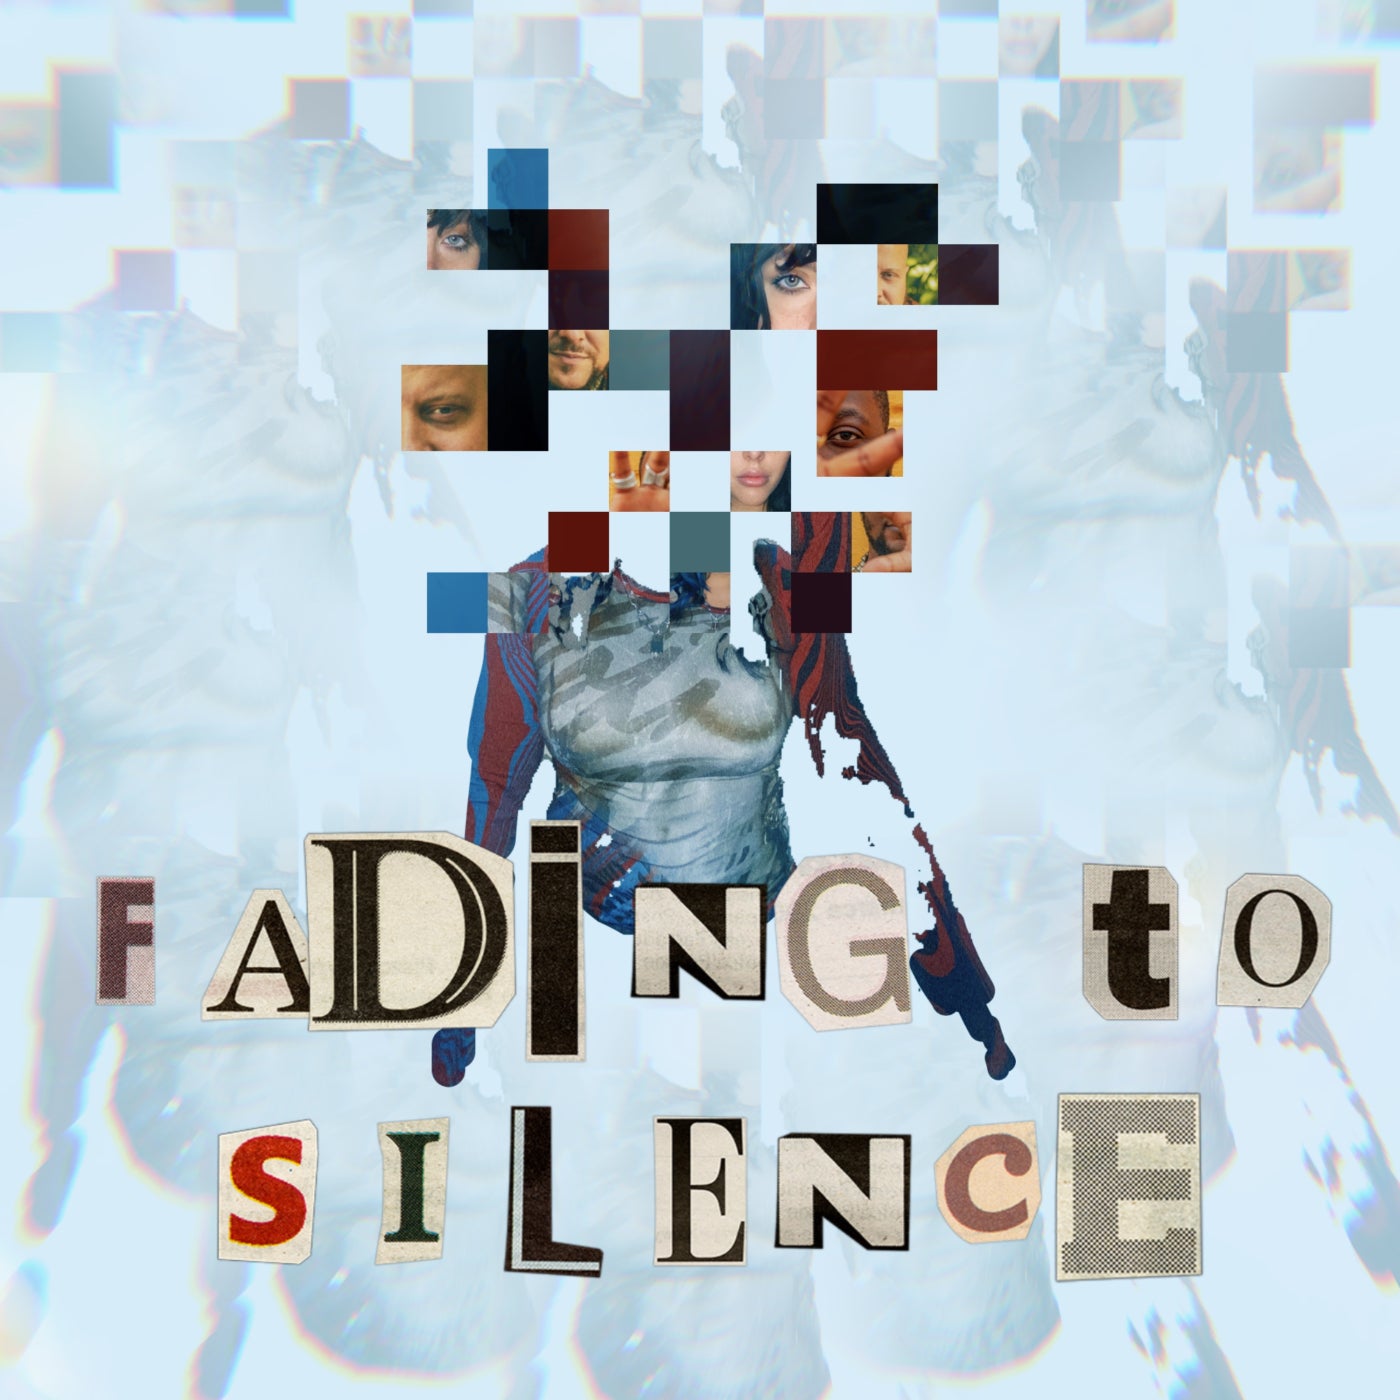 Fading to Silence